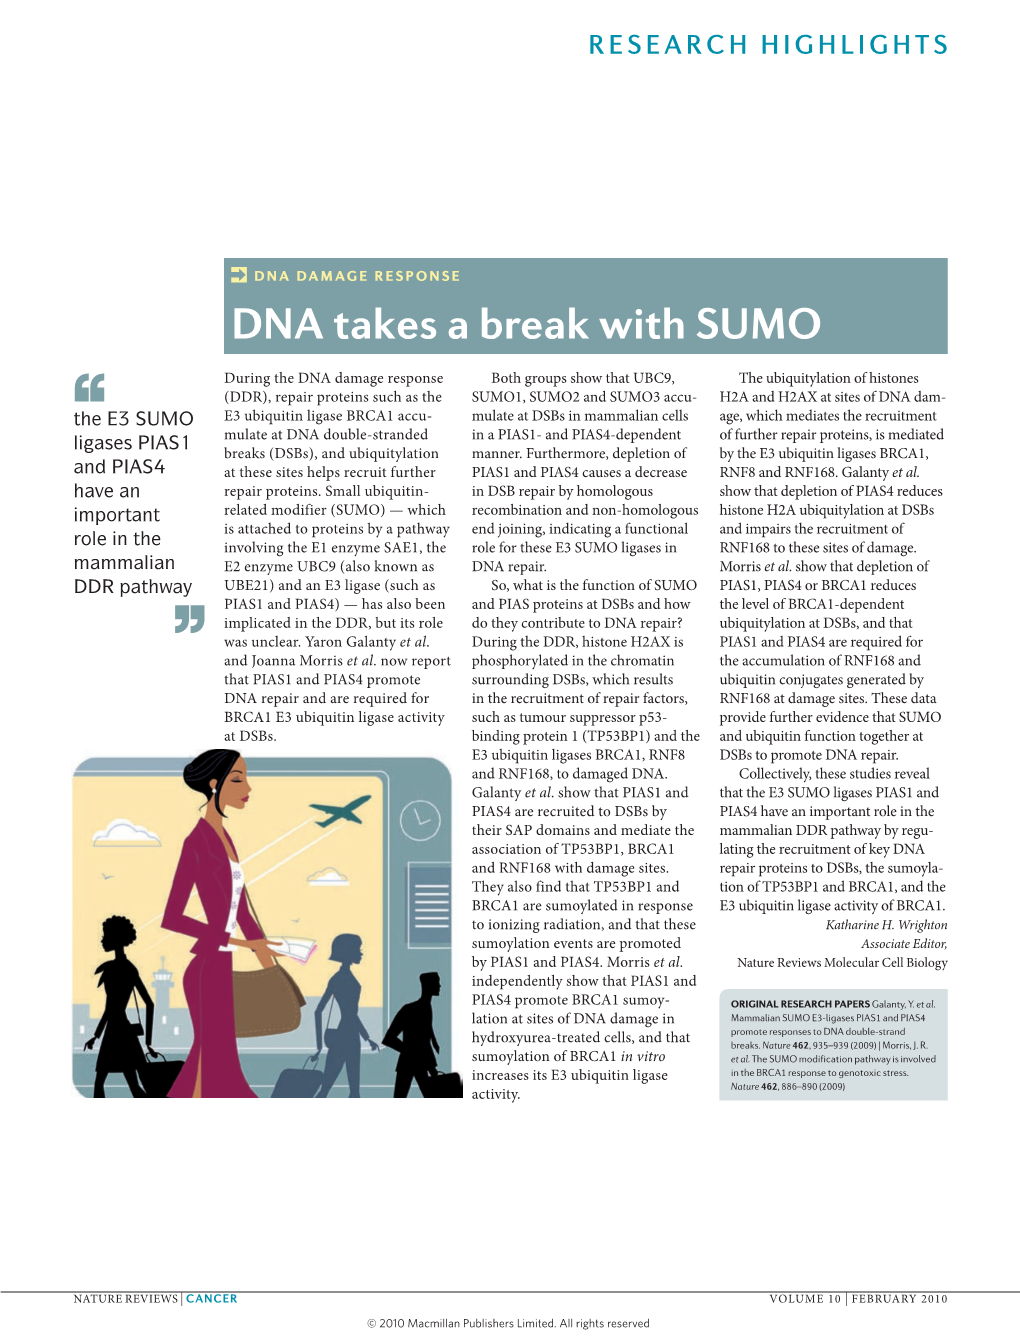 Dna Damage RESPONSE DNA Takes a Break with SUMO